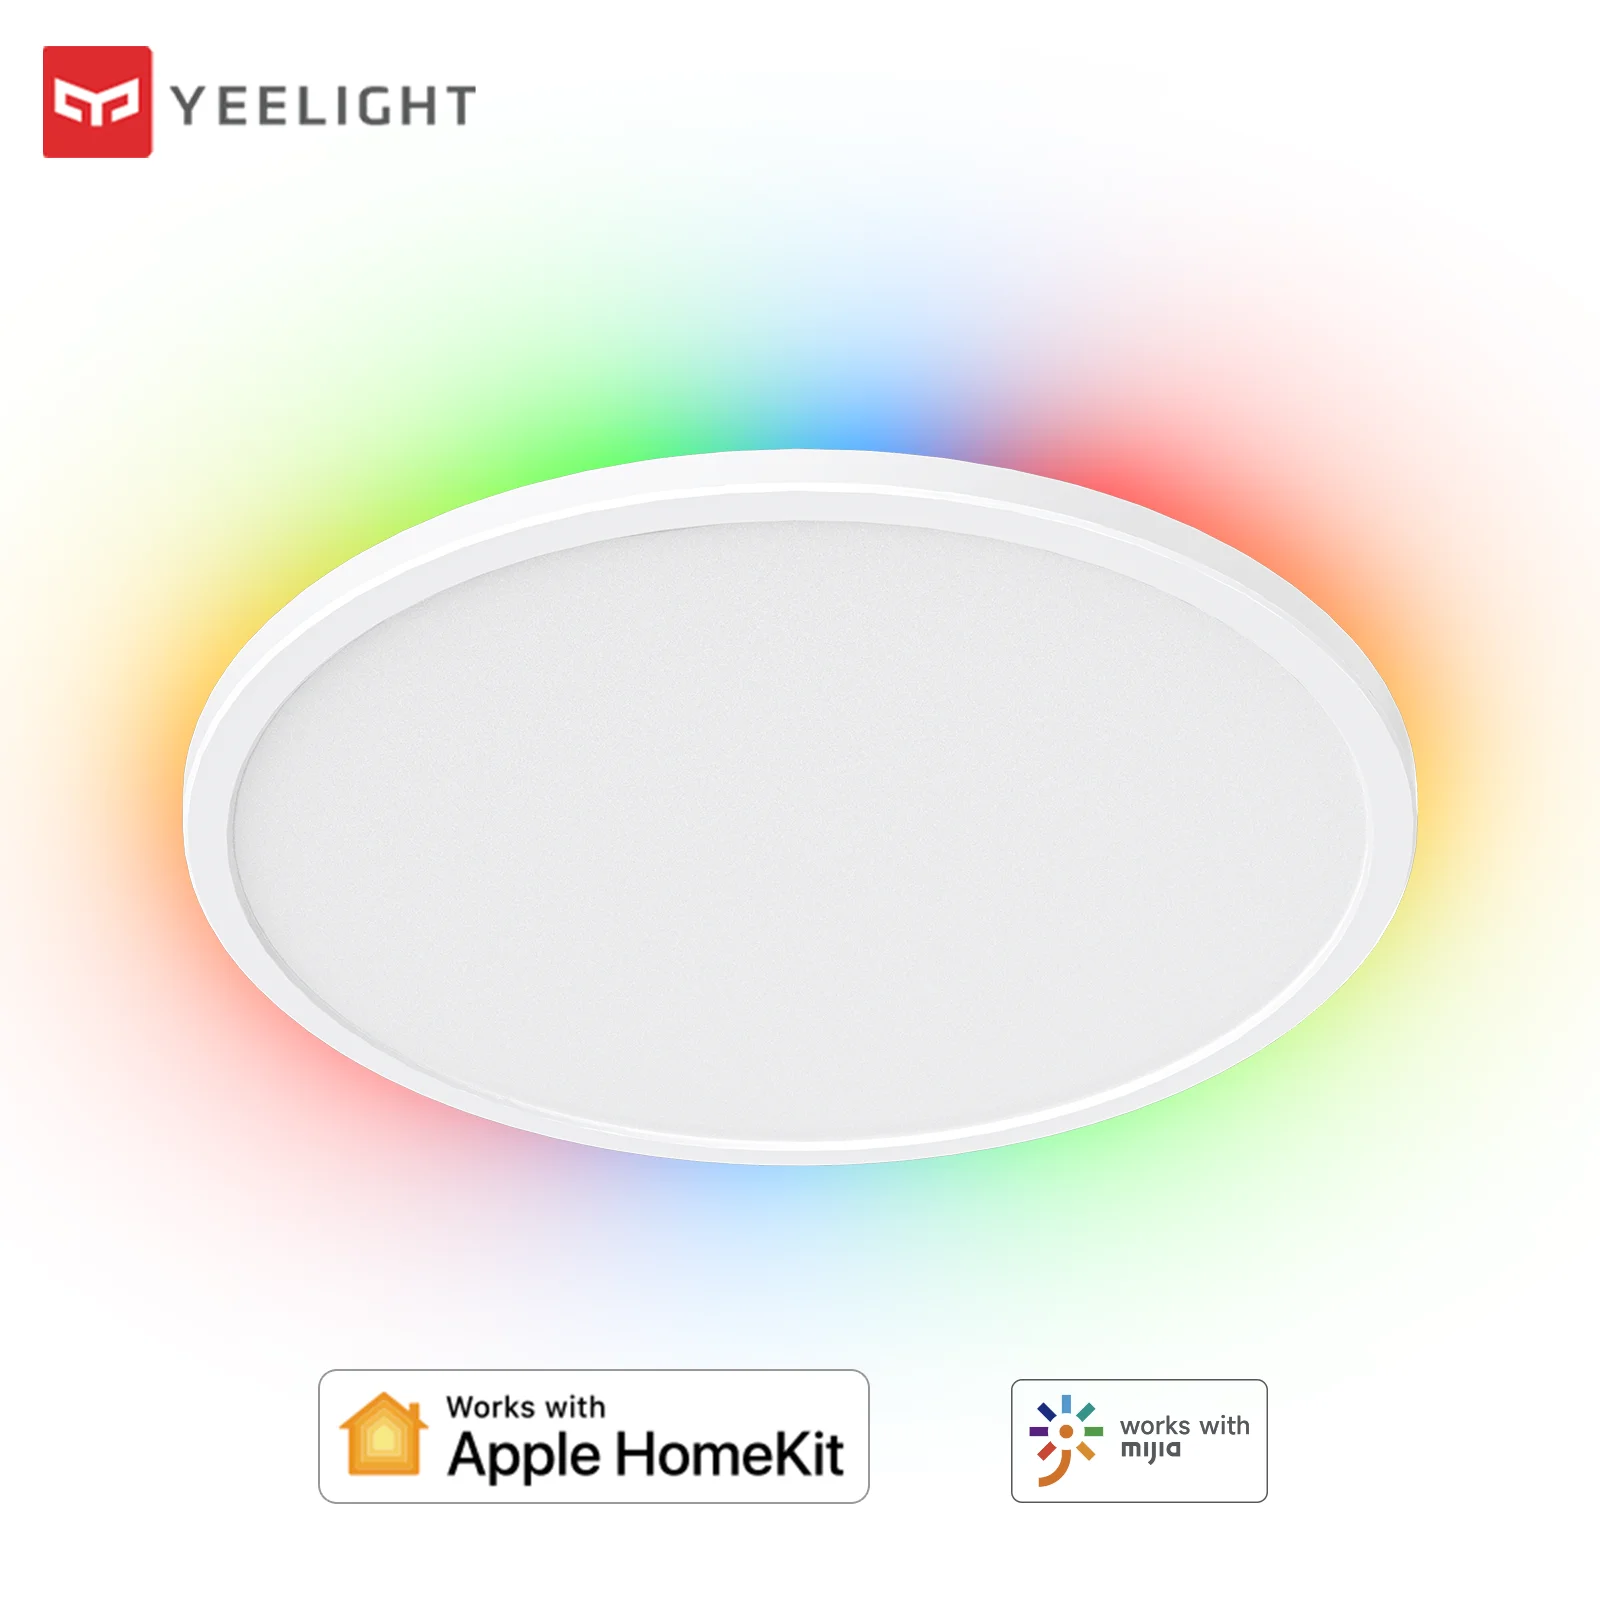 yeelight smart led RGB ceiling light 400C Ultra thin ambient color light smart voice control work with Homekit & Mi home app